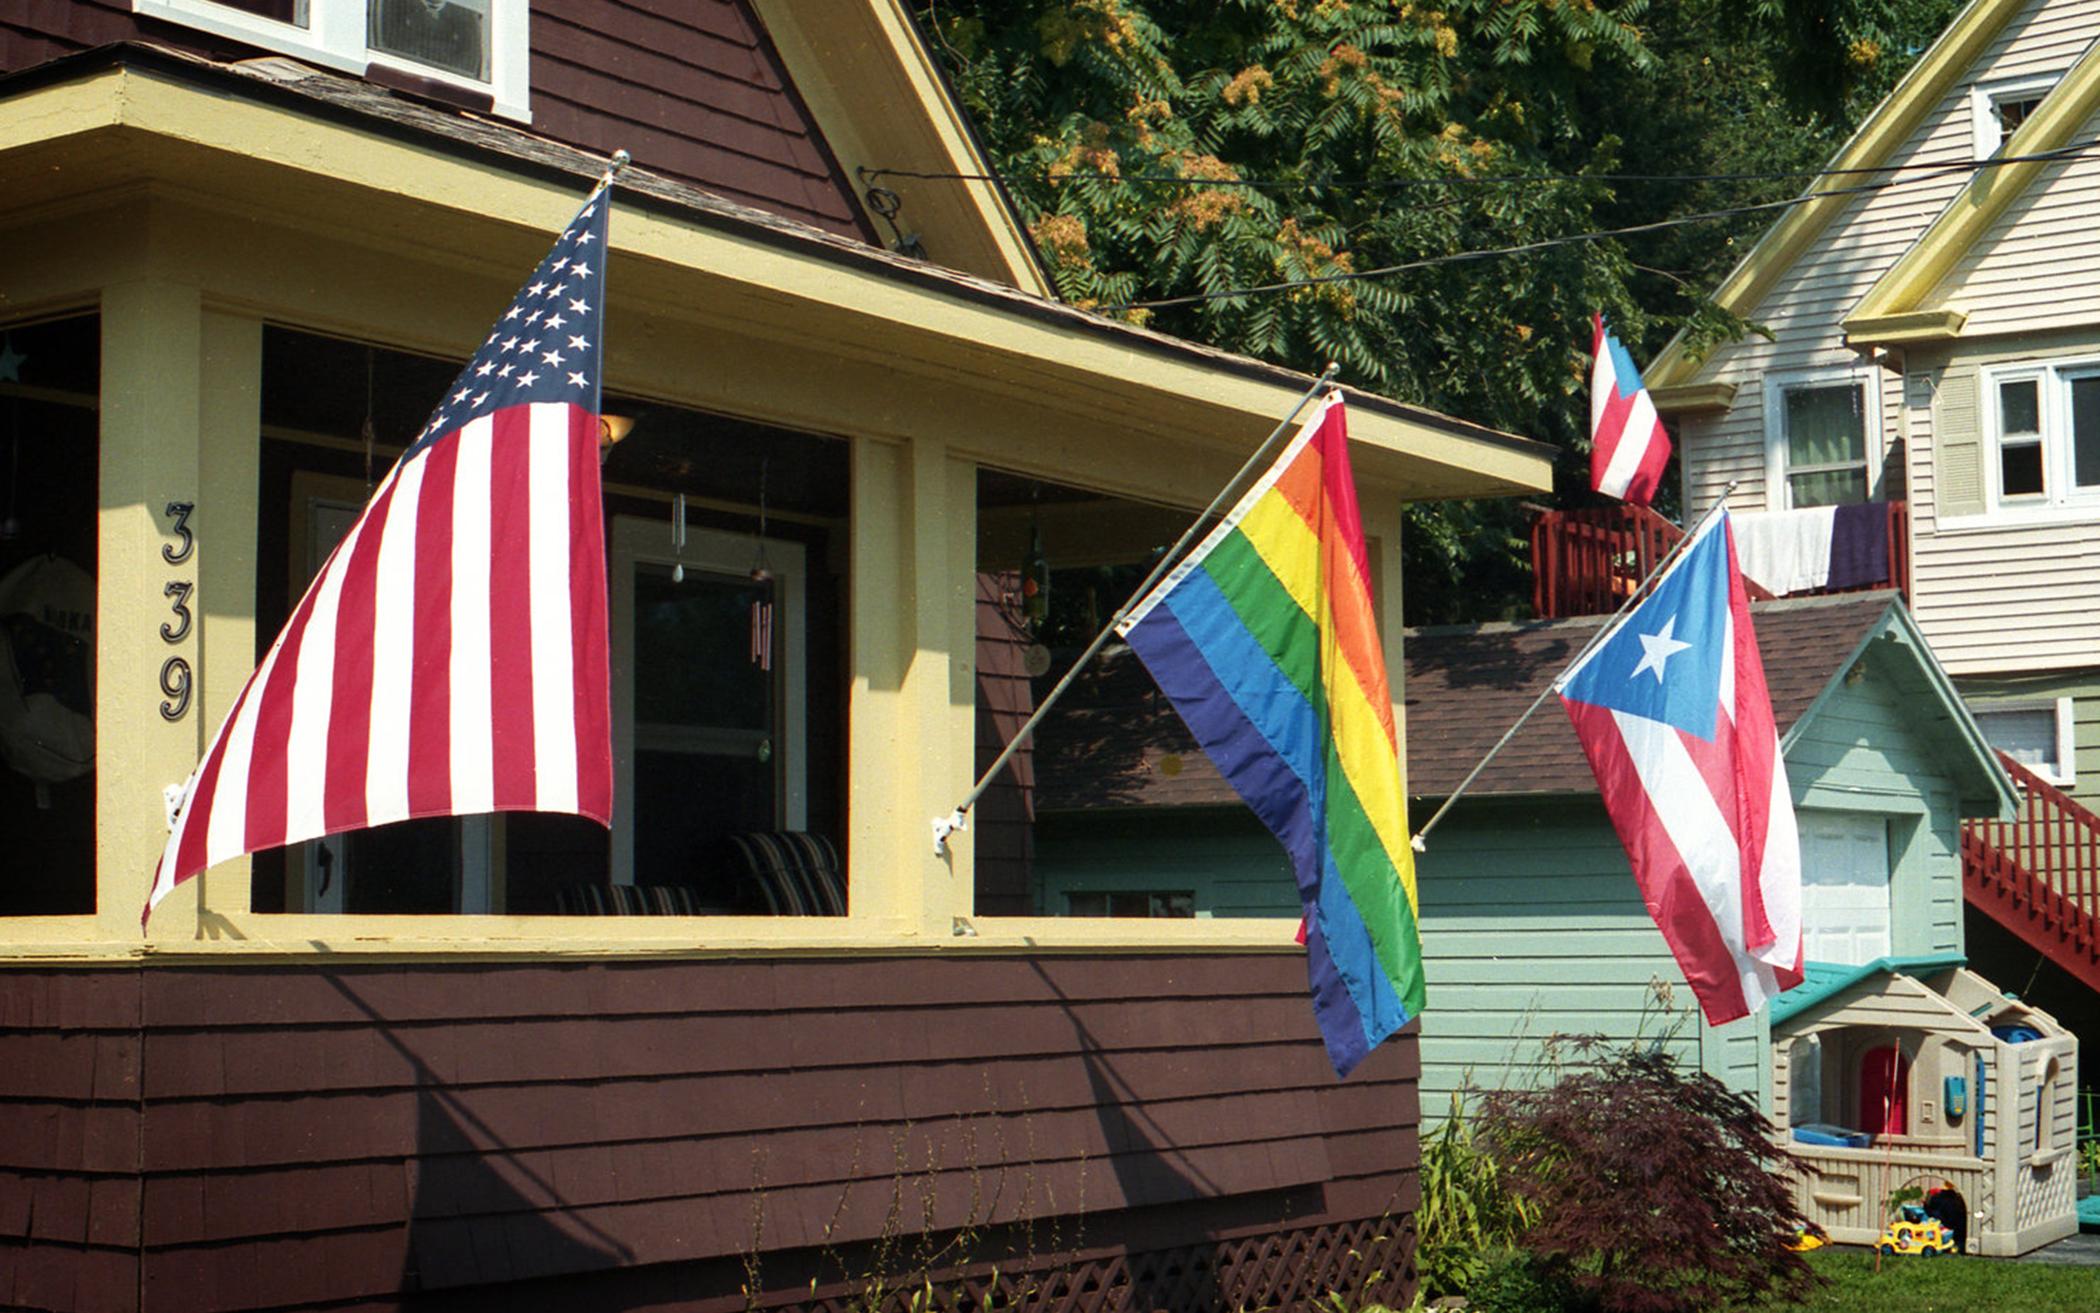 The author flies three flags on his front porch: the American flag, the Puerto Rican flag, and the Pride rainbow flag. He says the American flag honors his country and the other two flags honor his neighbors and friends.